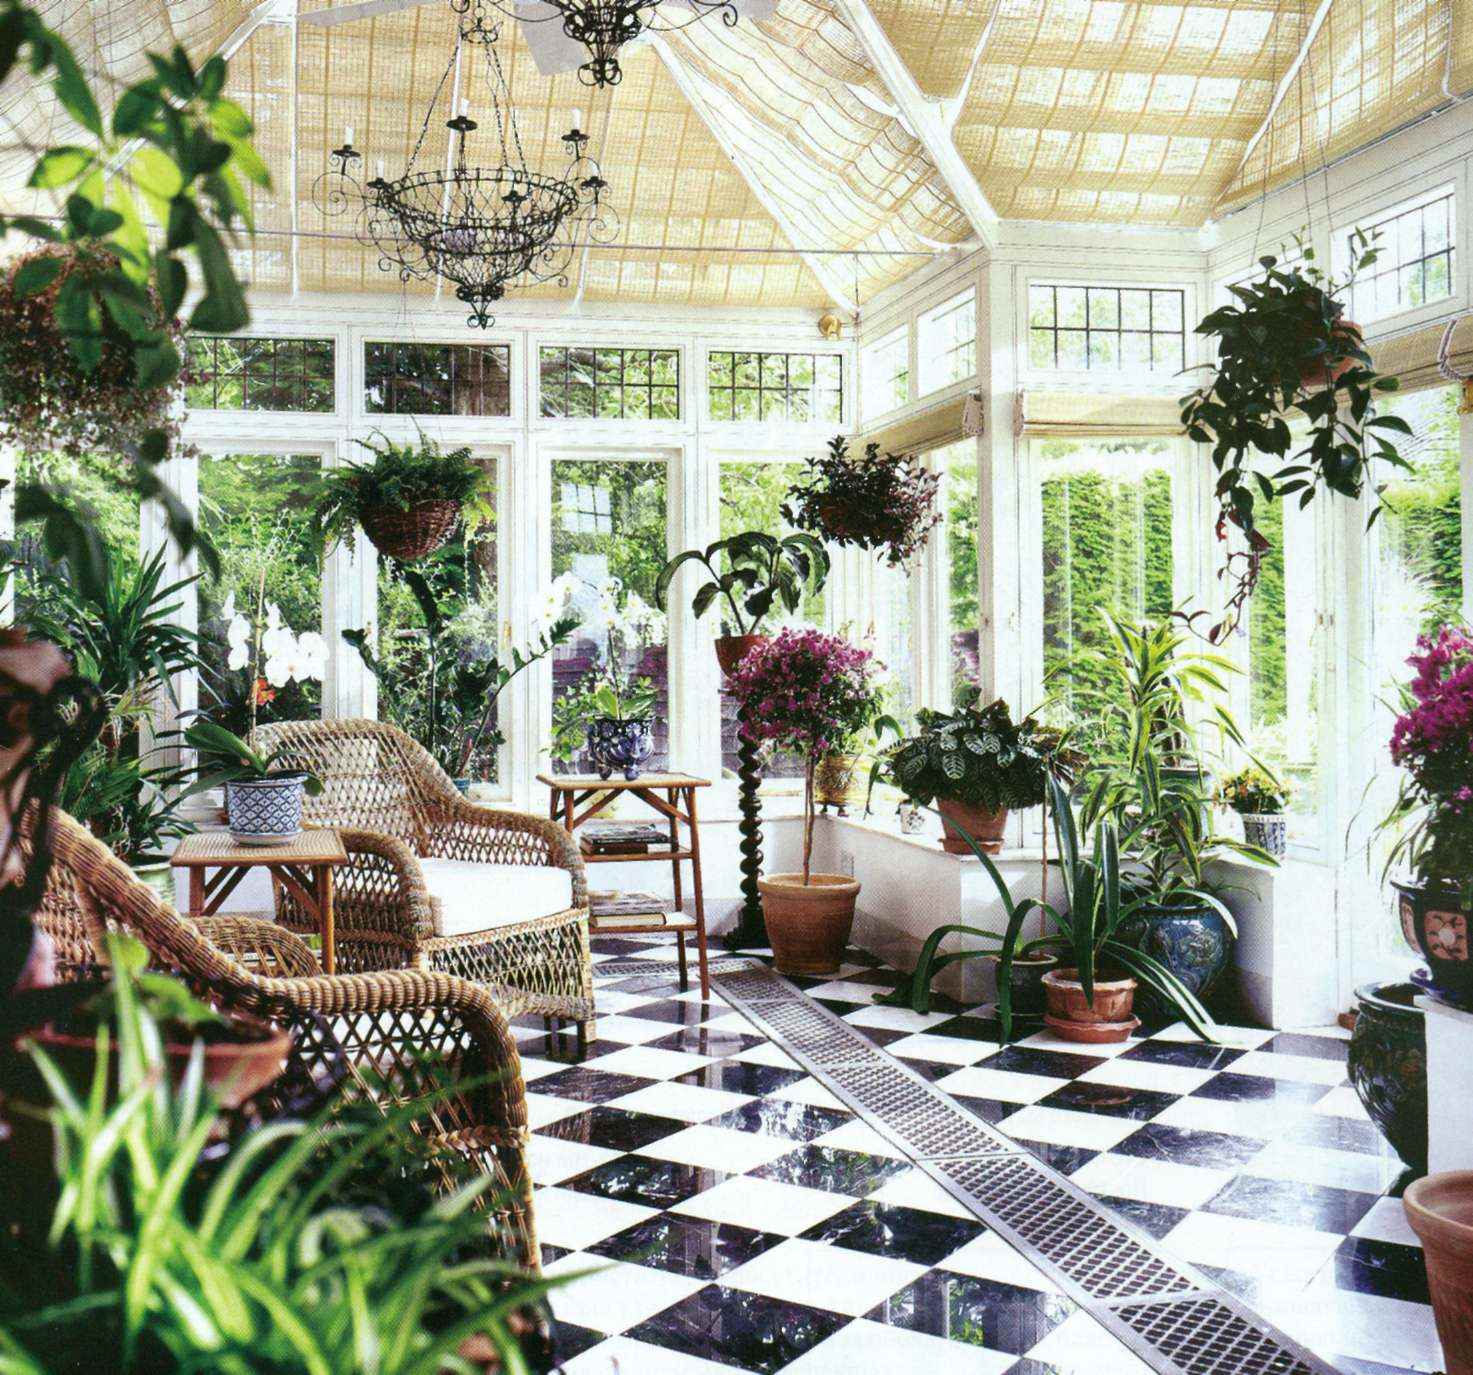 An example of using bright ideas for decorating a winter garden